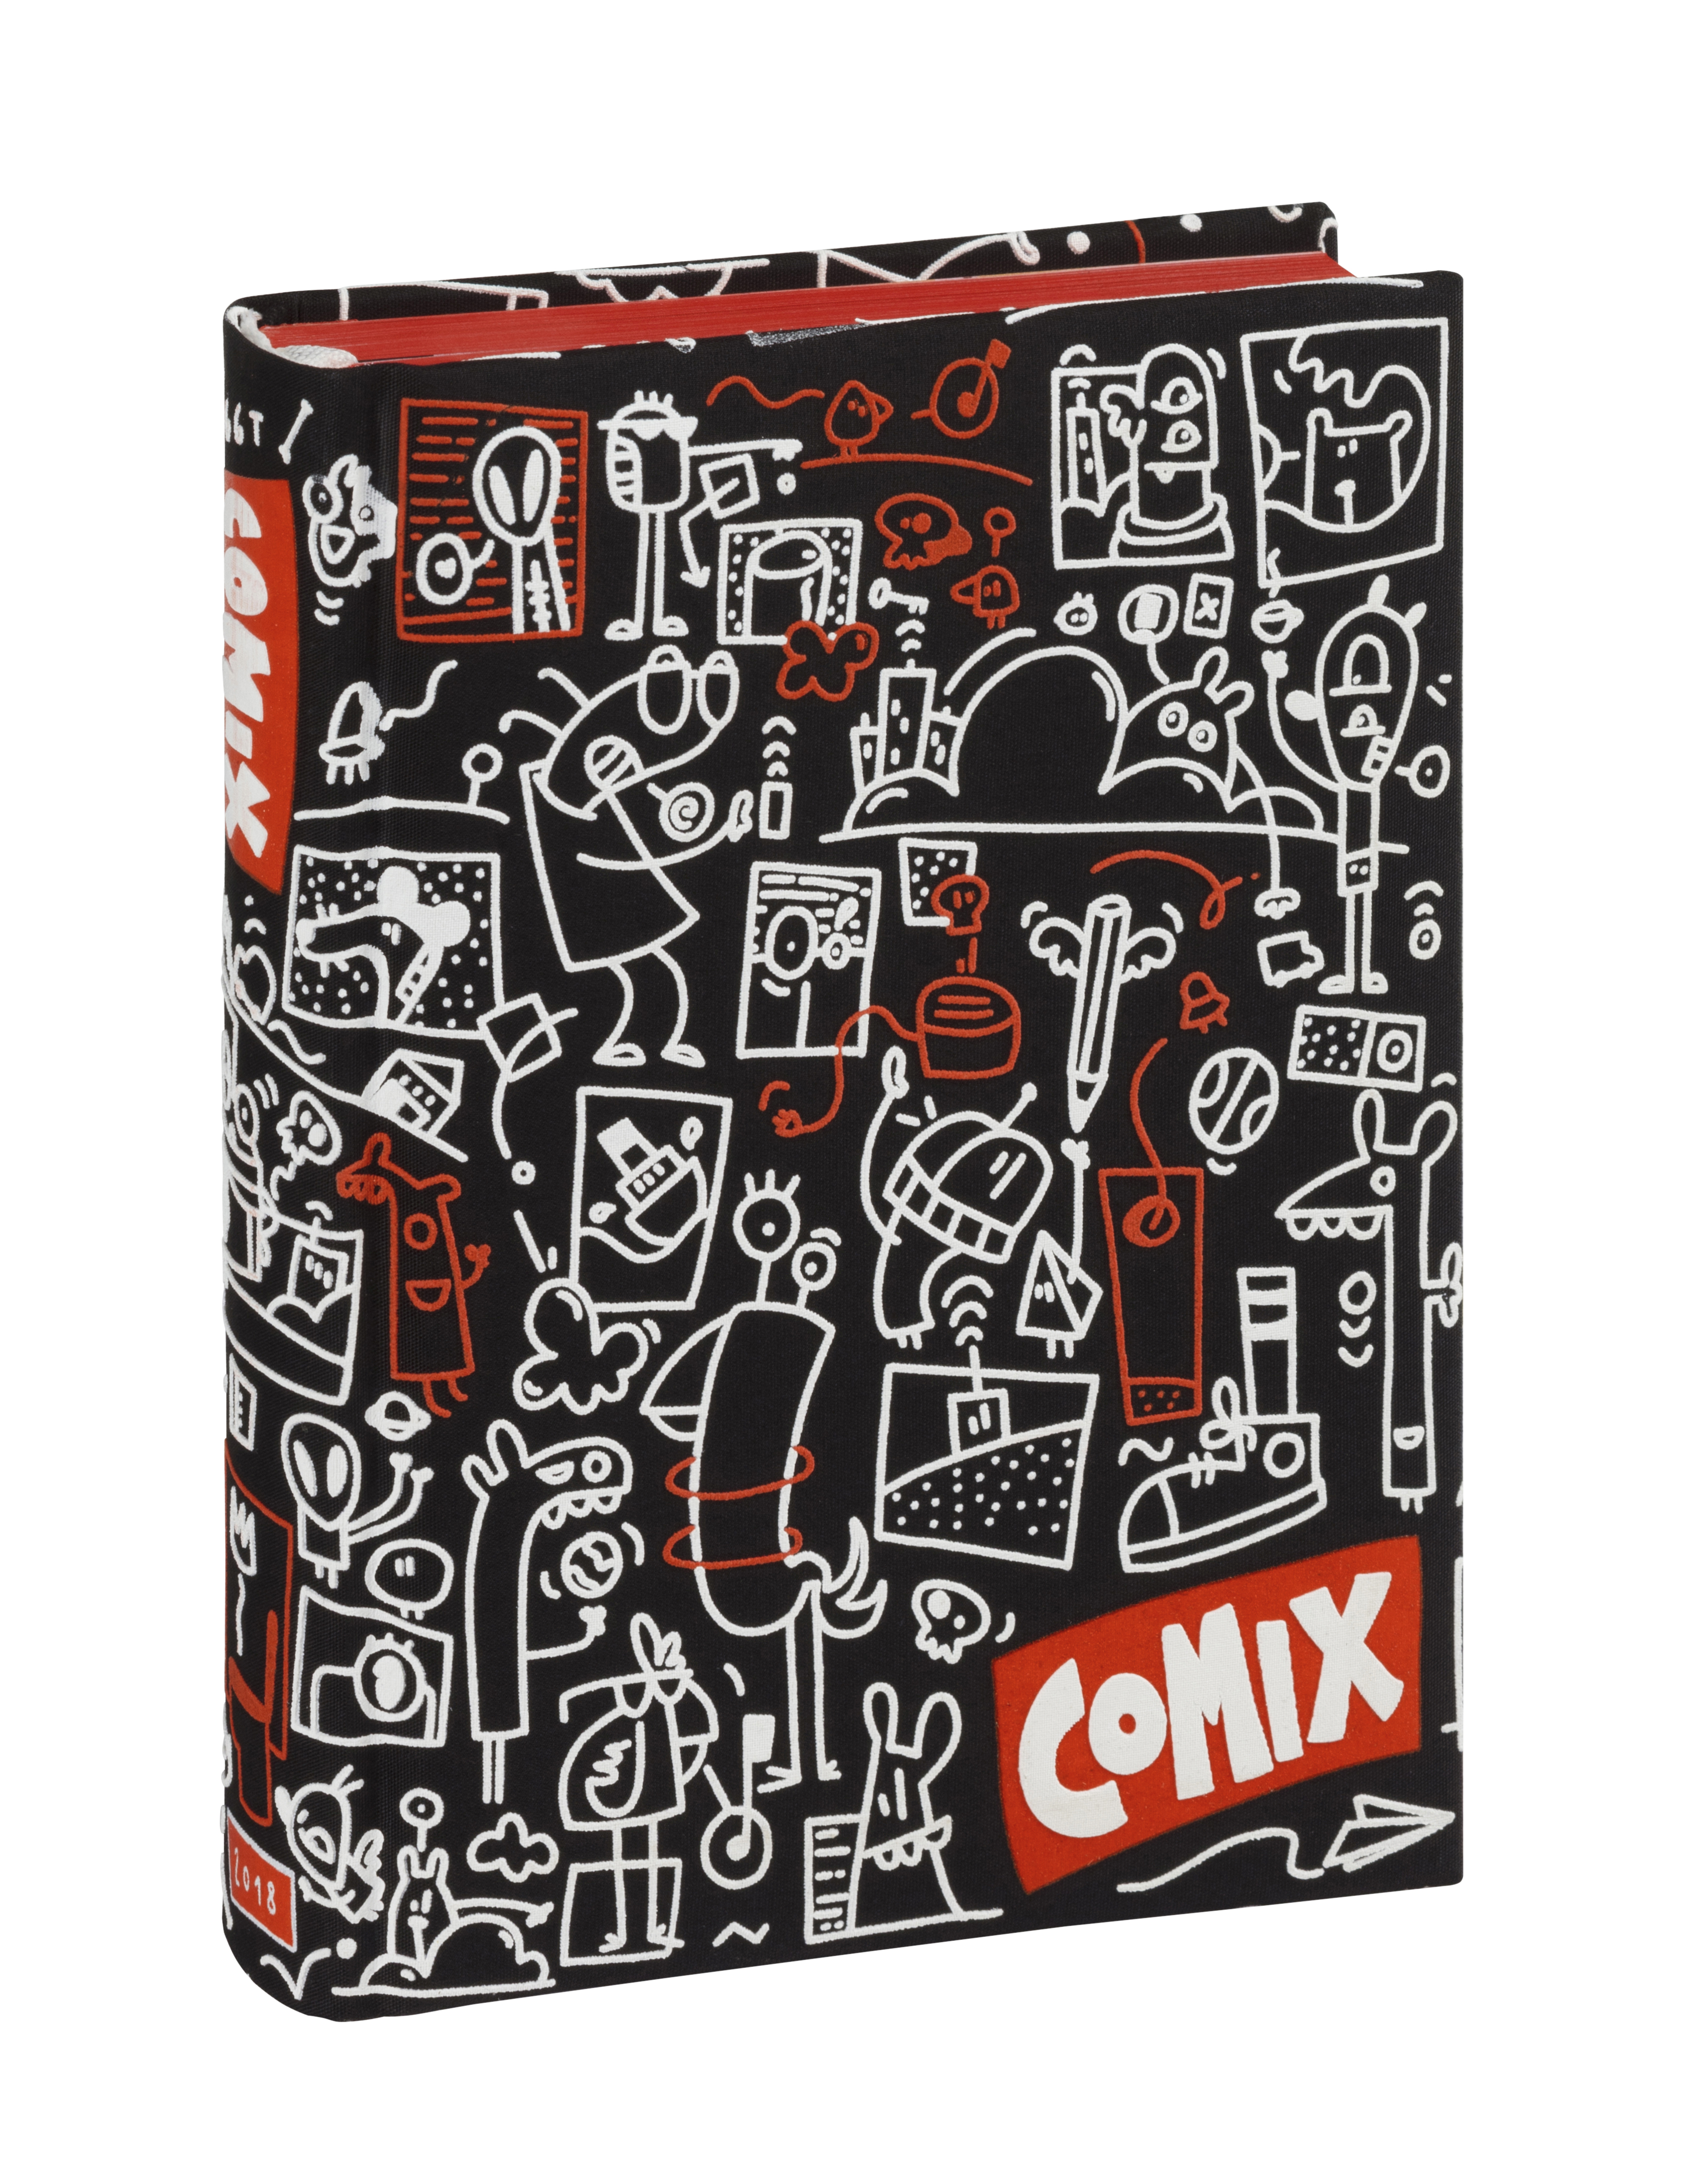 Comix Special Edition by GGT